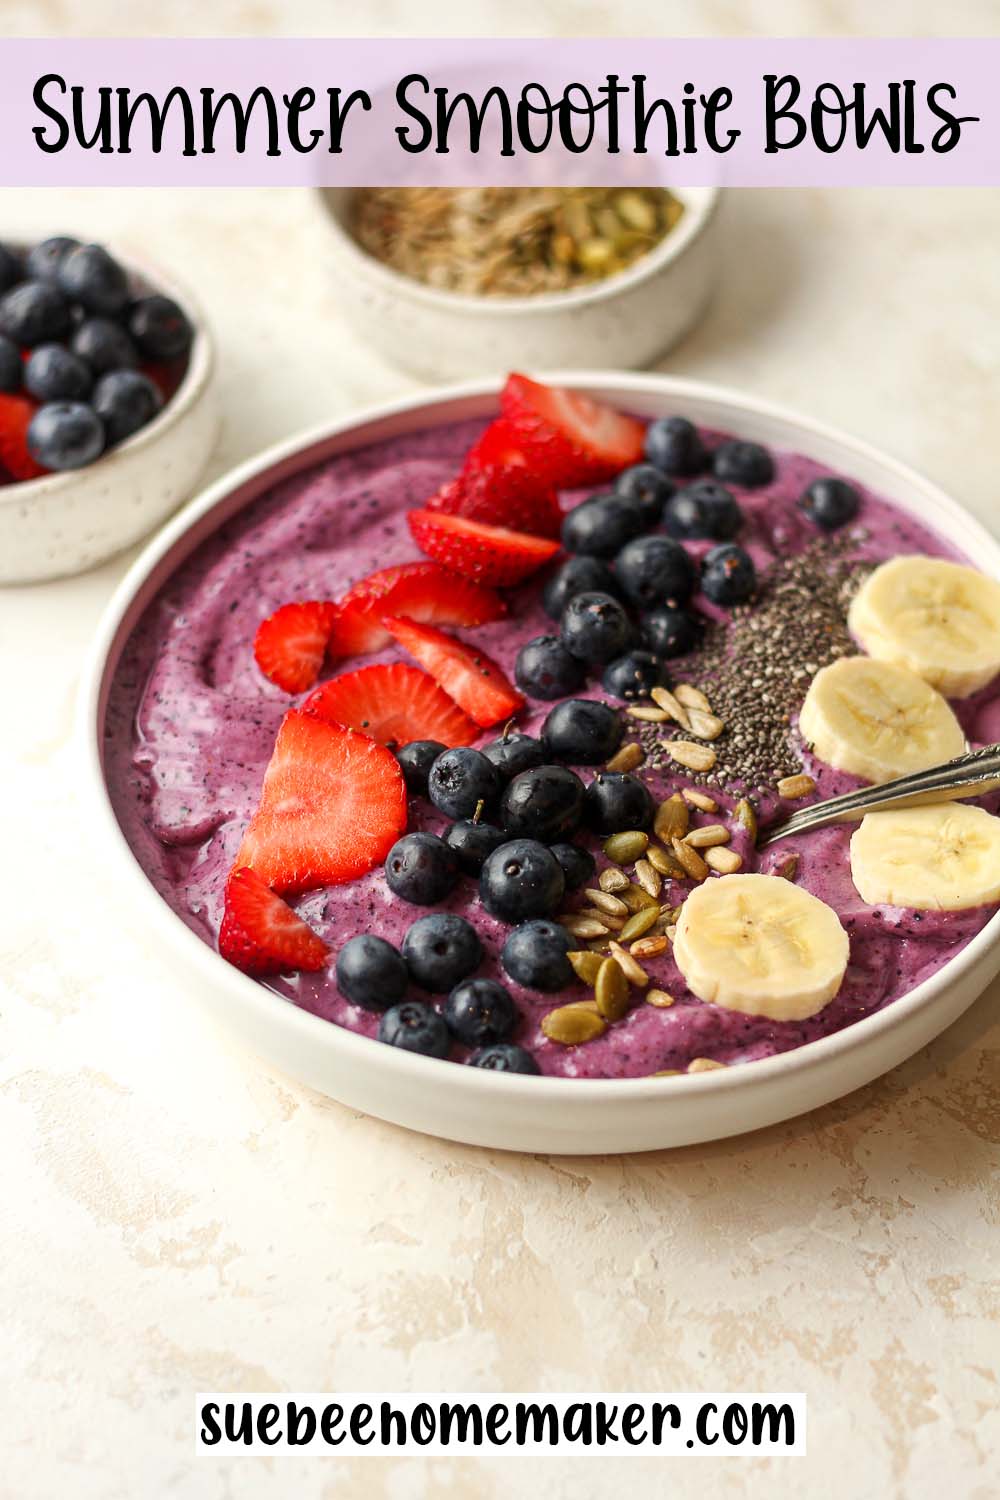 Side view of a summer smoothie bowl.